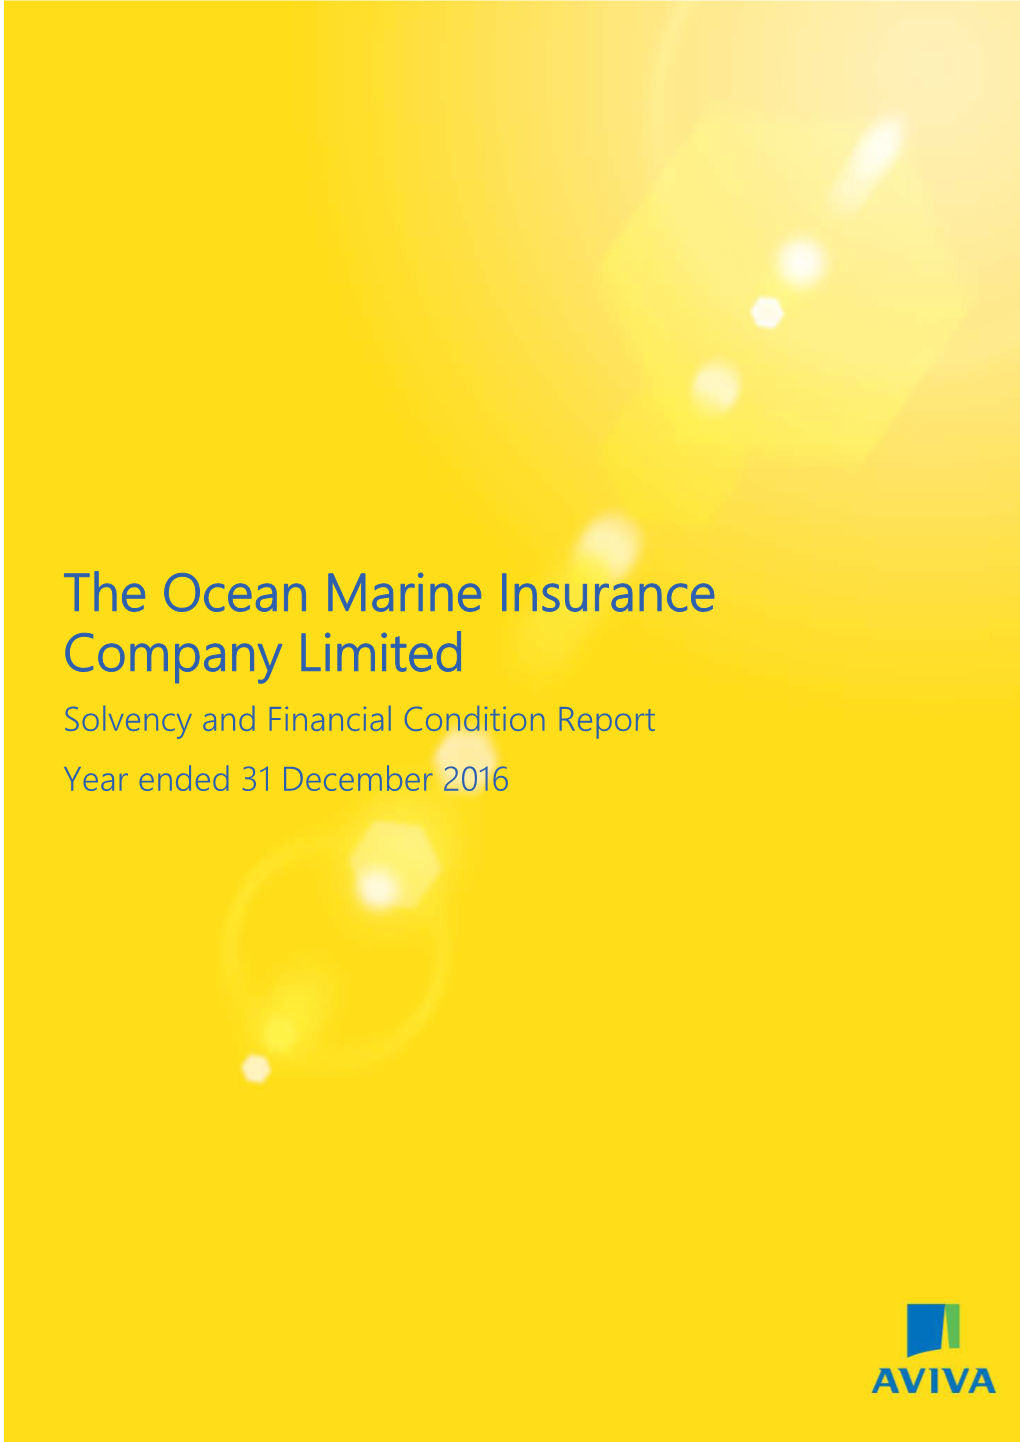 The Ocean Marine Insurance Company Limited Solvency and Financial Condition Report Year Ended 31 December 2016